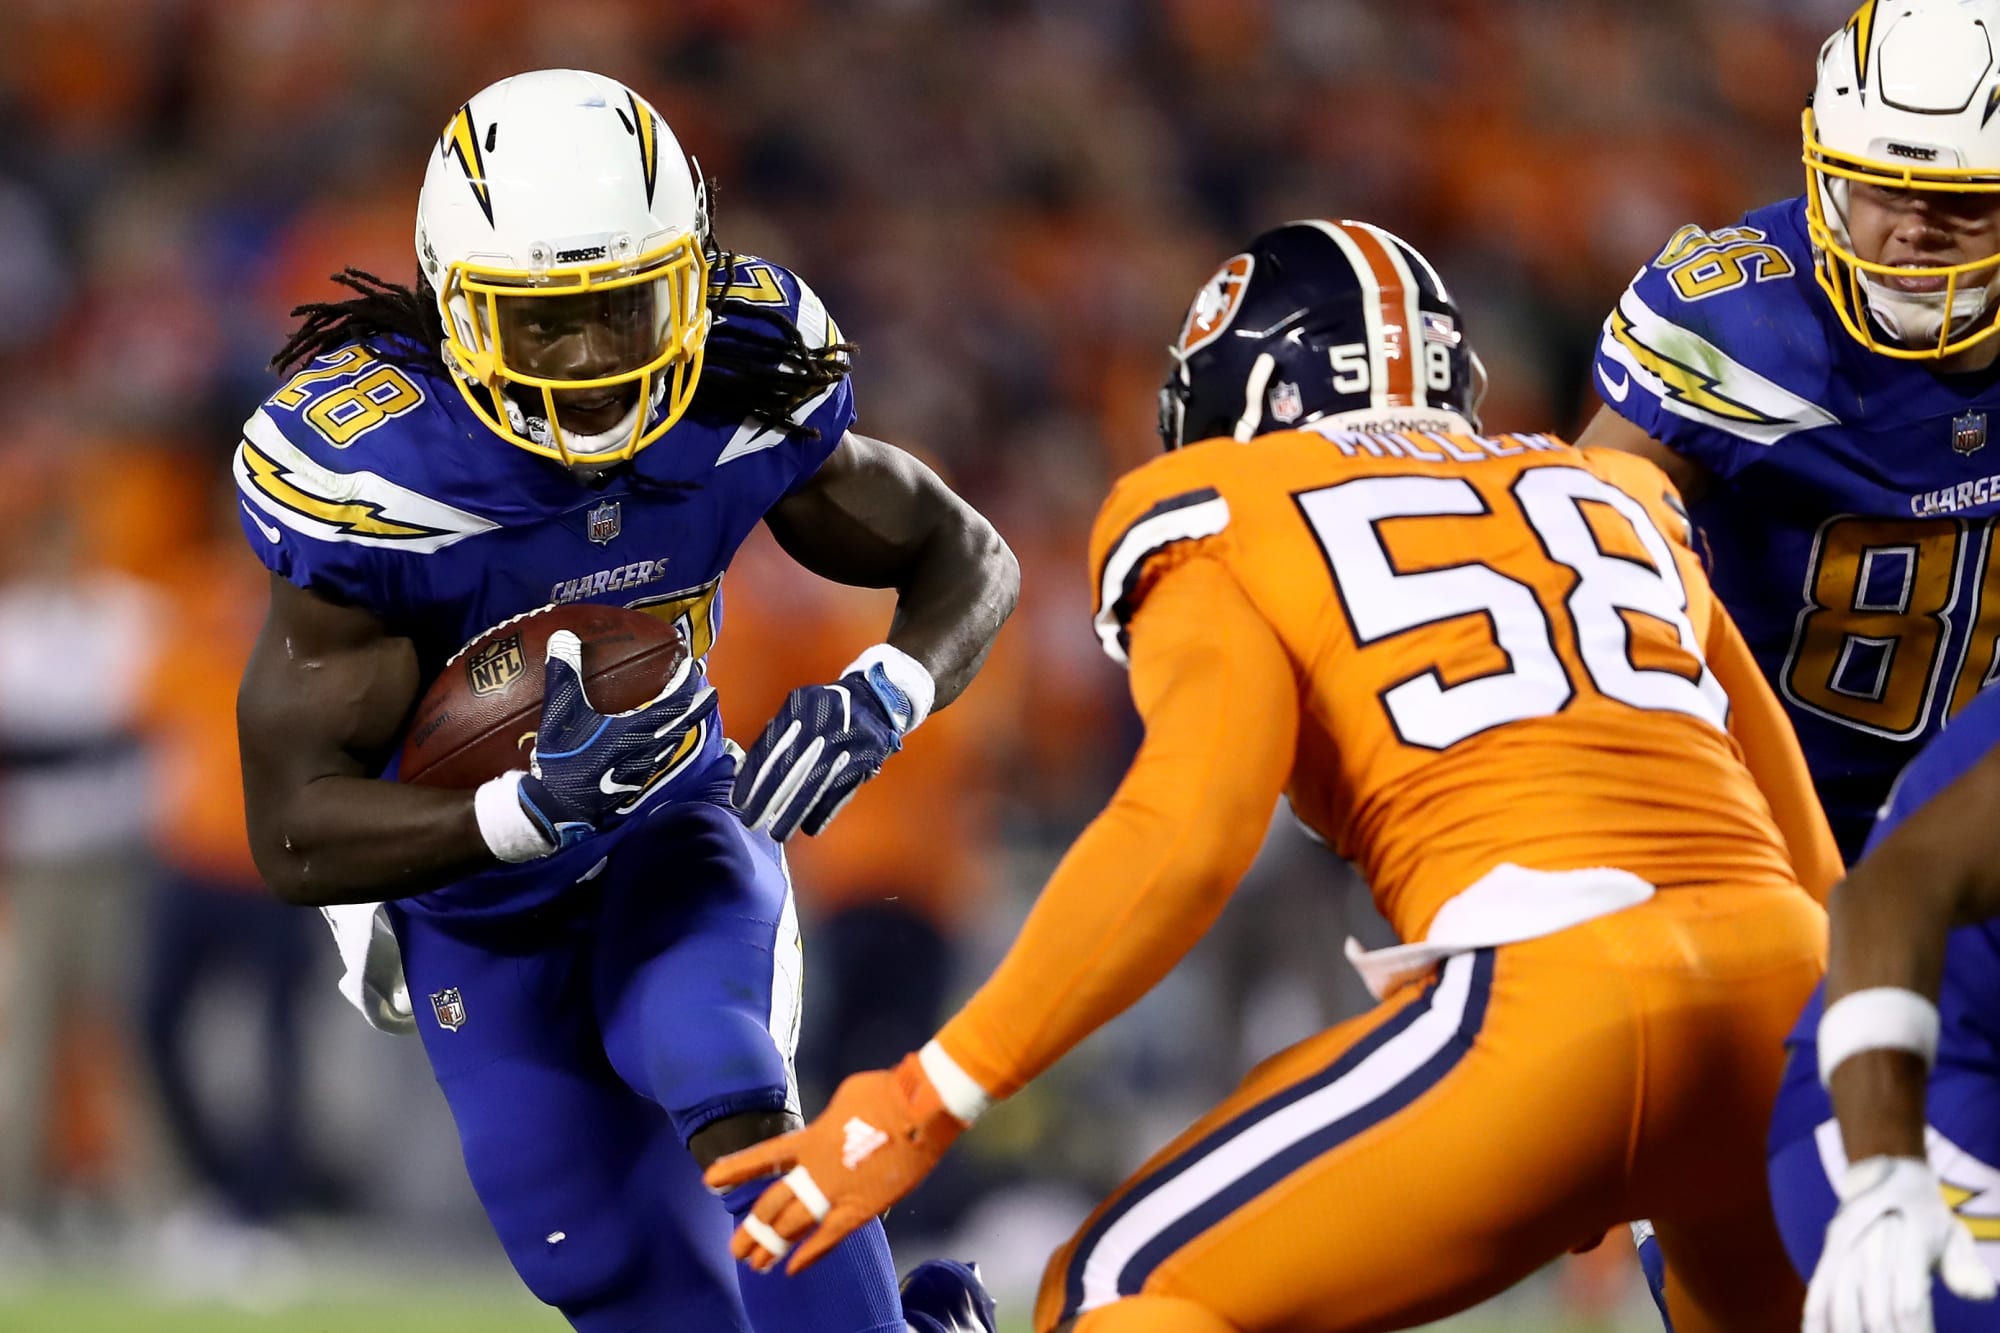 Chargers vs Broncos Preview, score prediction and more